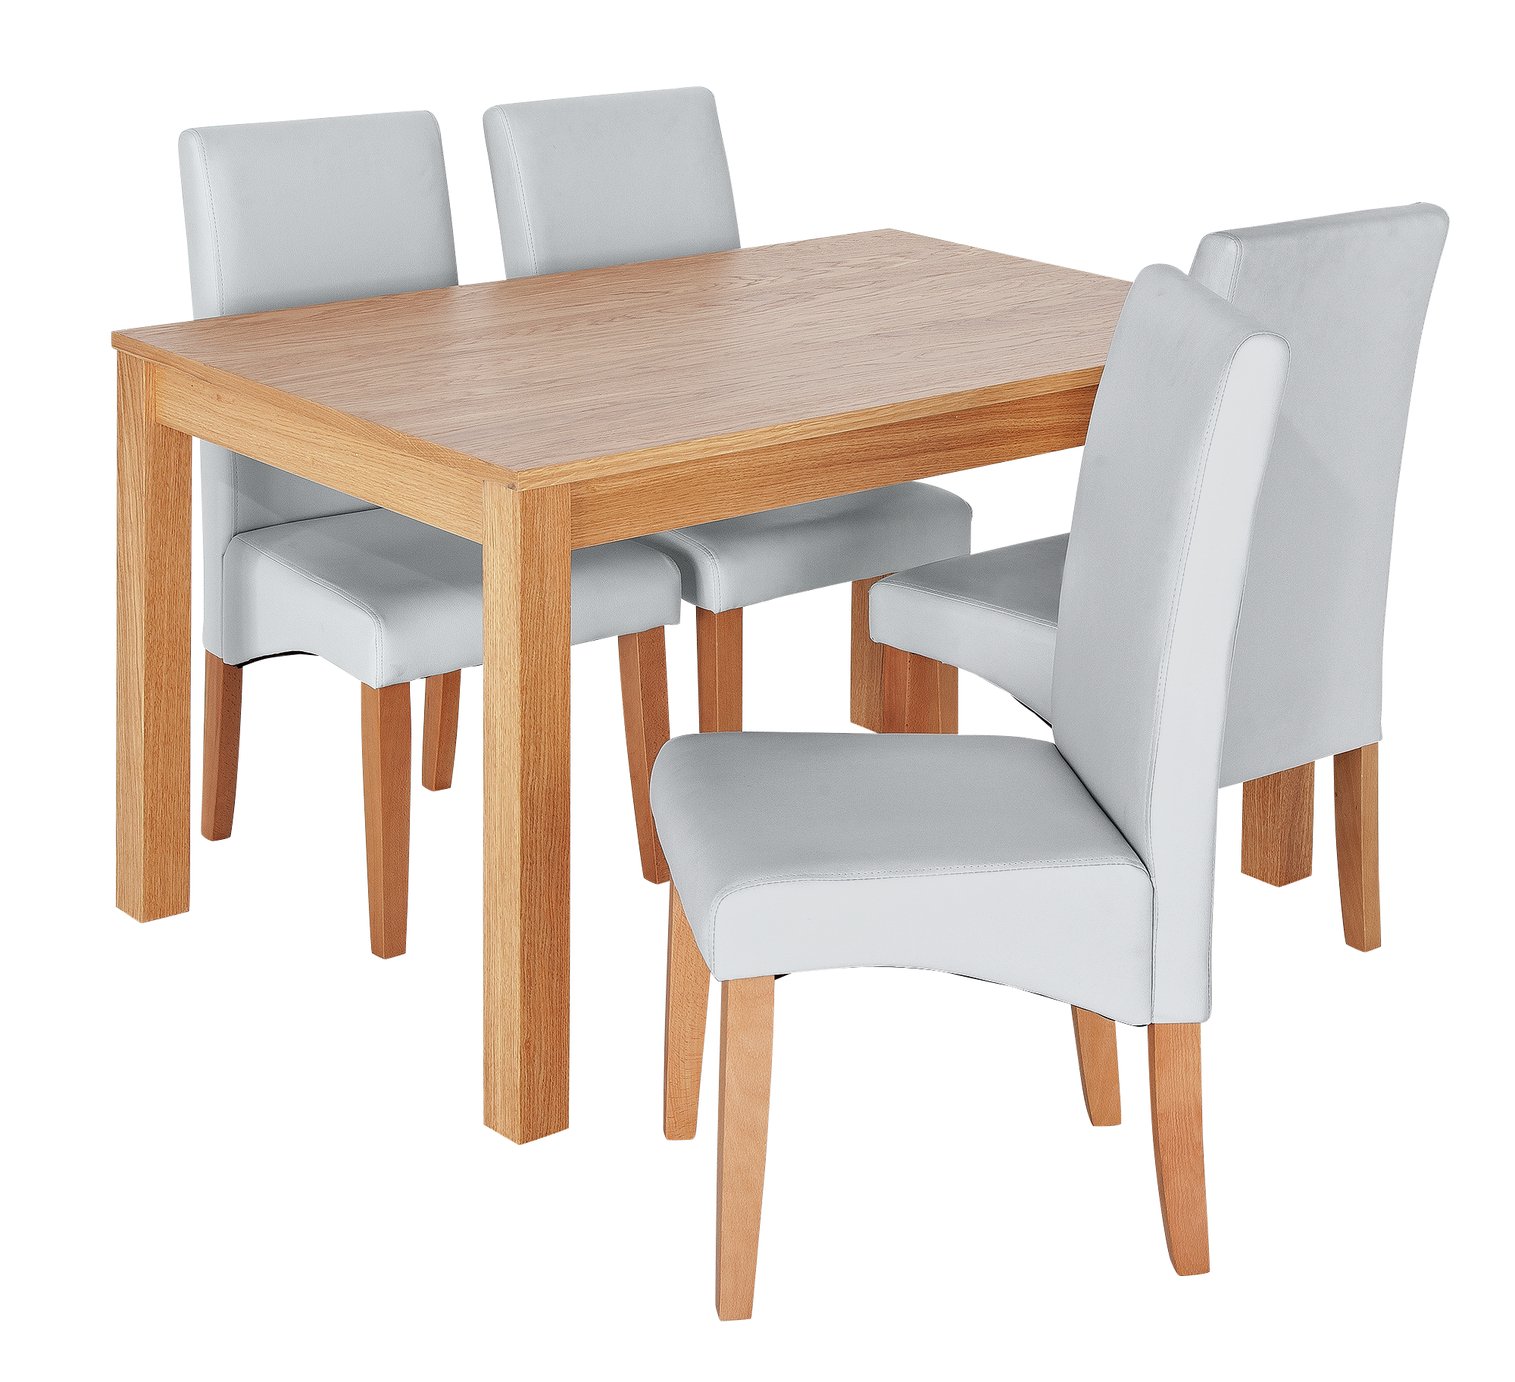 Argos Home Clifton Oak Dining Table & 4 Grey Chairs